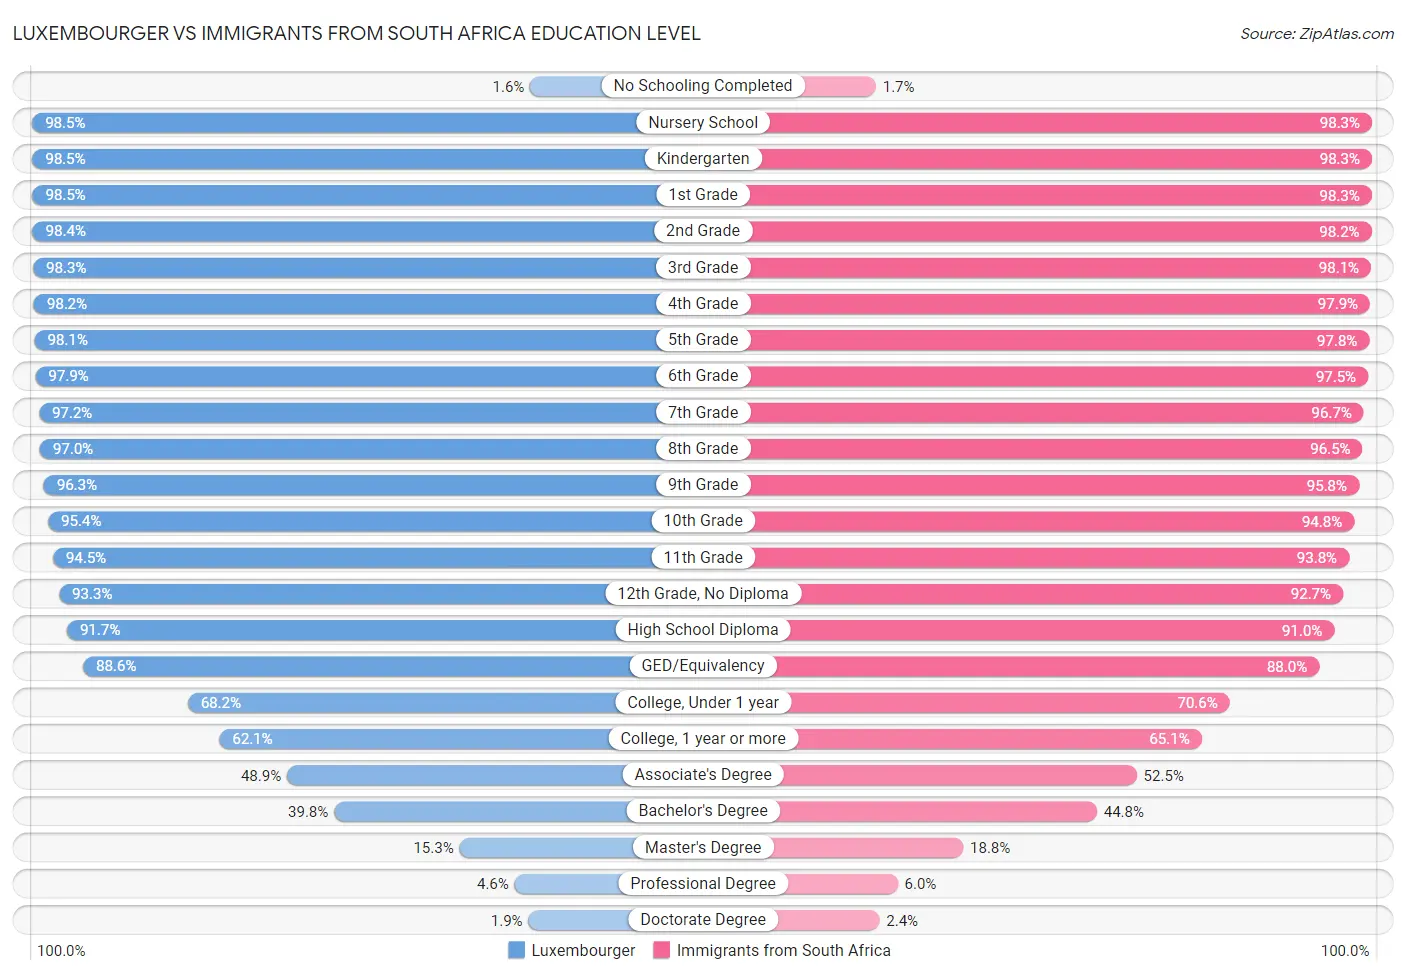 Luxembourger vs Immigrants from South Africa Education Level